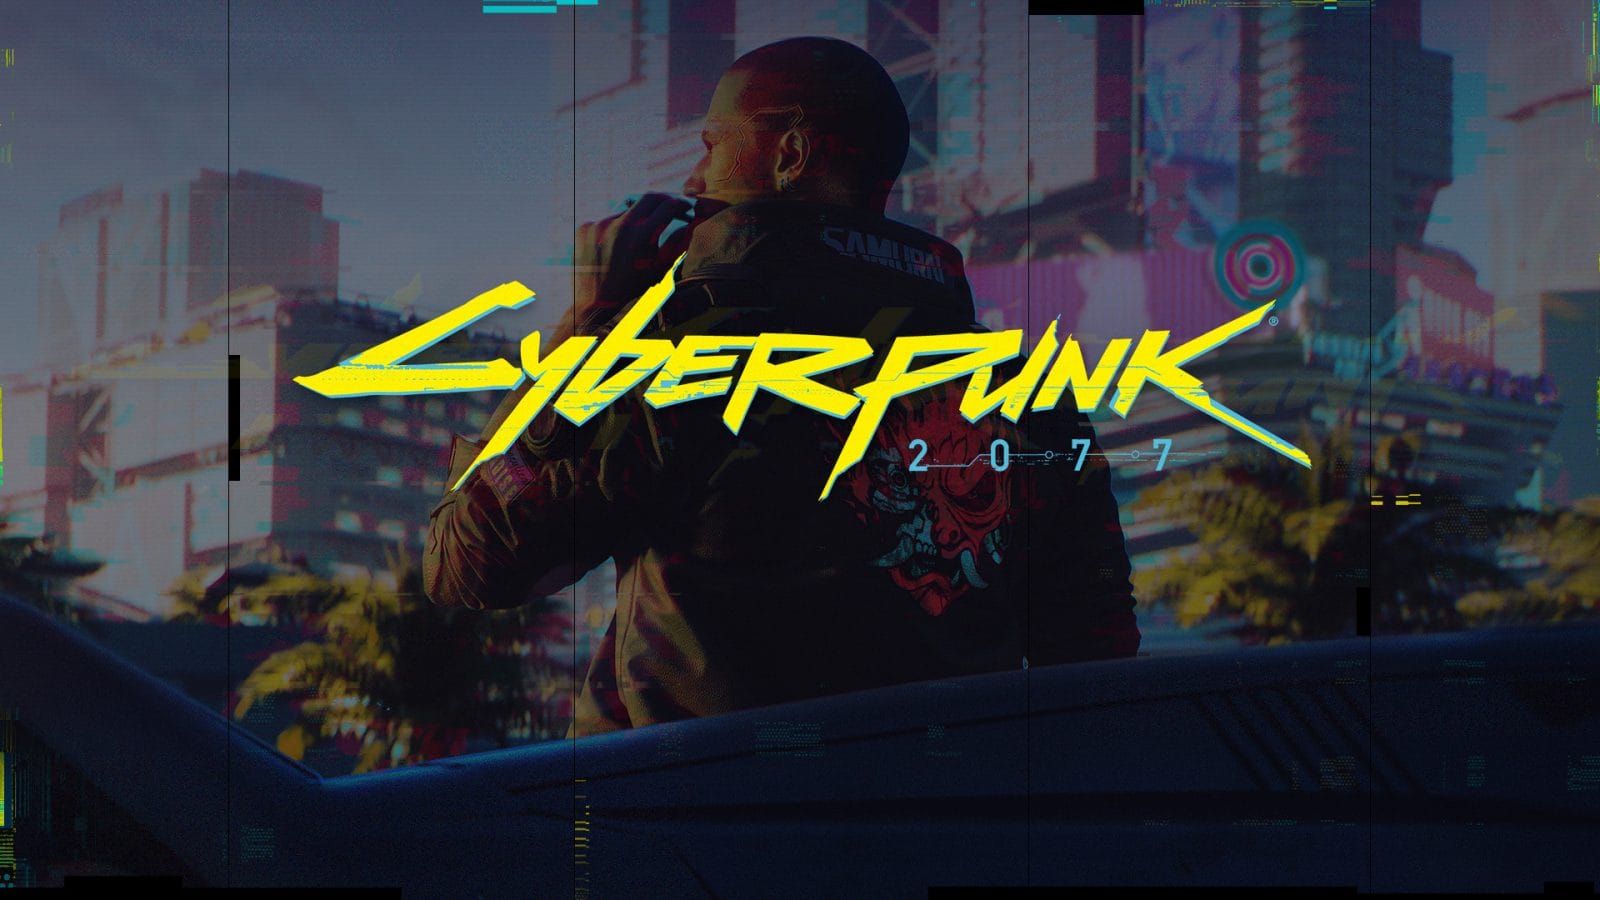 Cyberpunk 2077 Won't Launch on Google Stadia at the Same Time As PC and Consoles